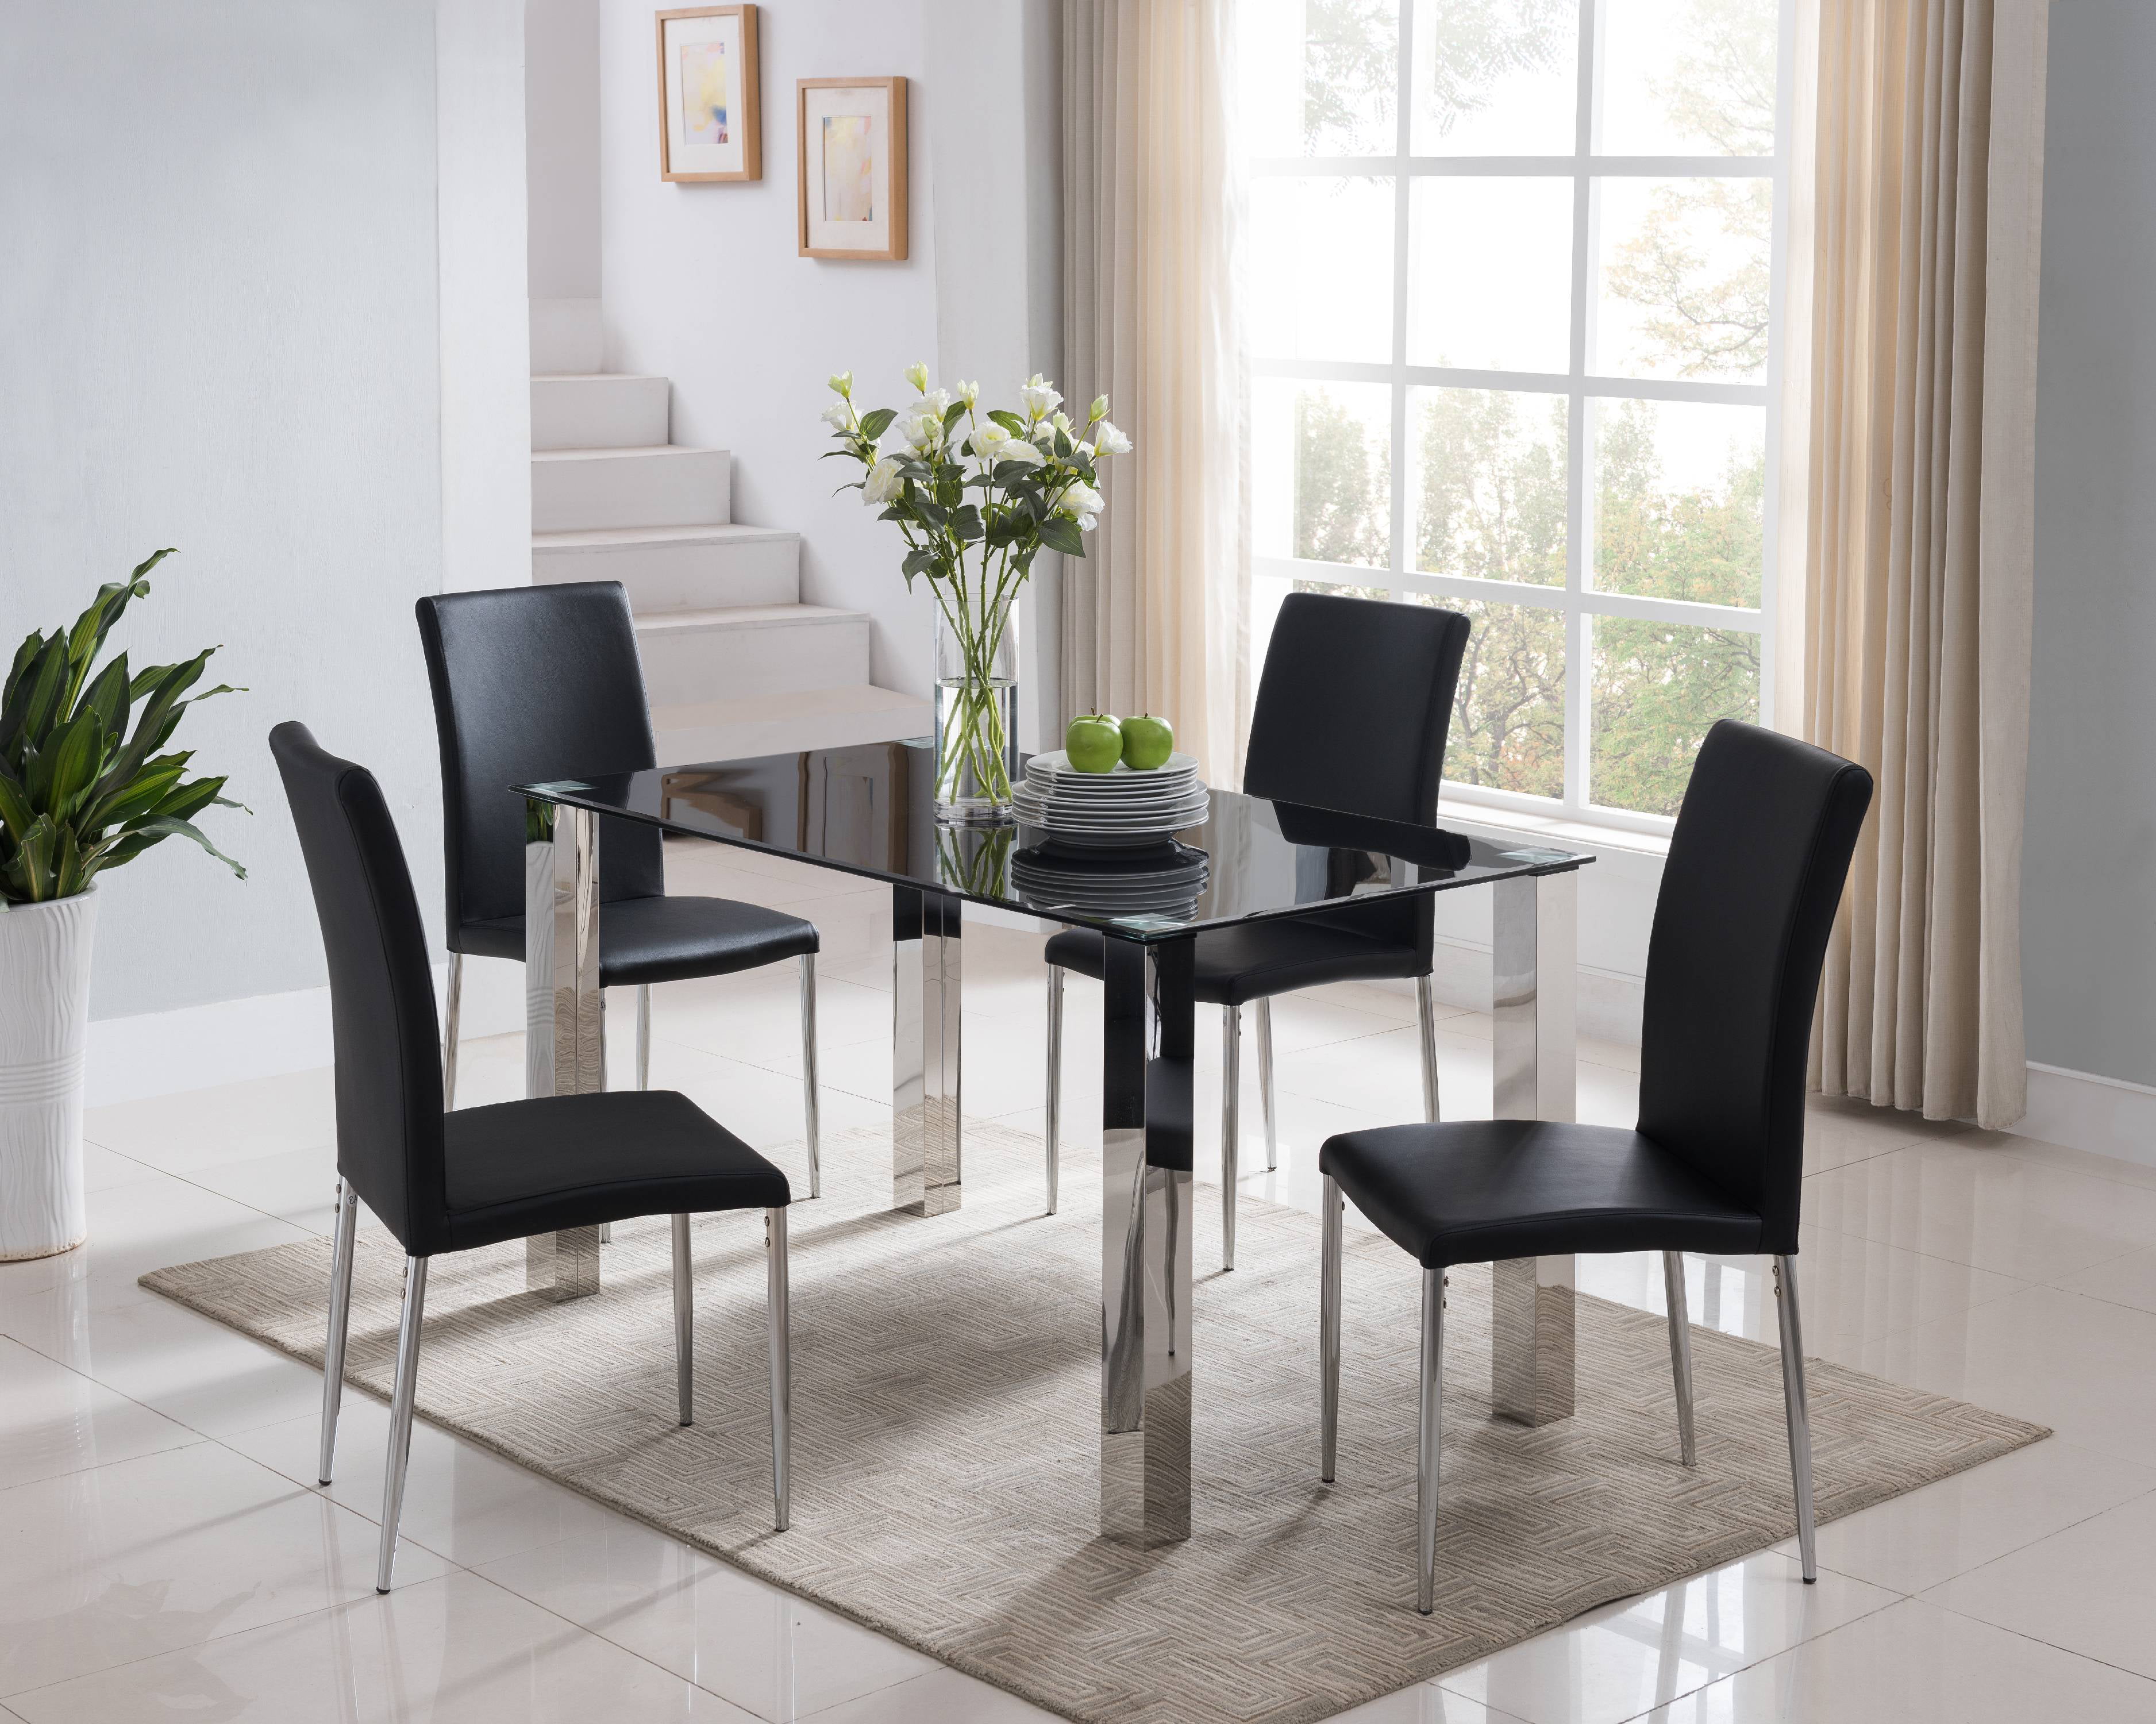 Black Faux Leather Dining Room Chairs